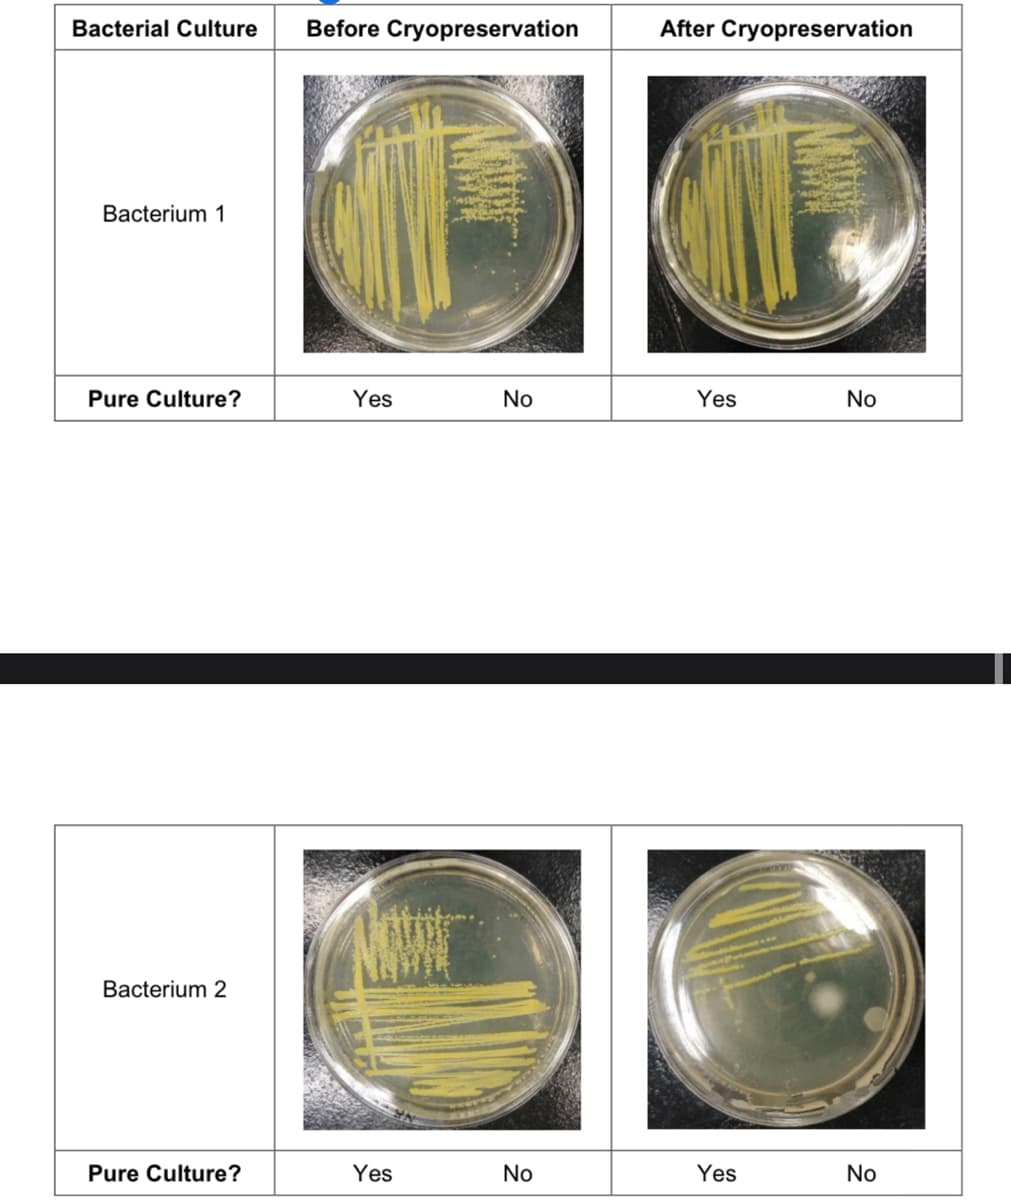 Bacterial Culture Before Cryopreservation
Bacterium 1
Pure Culture?
Bacterium 2
Pure Culture?
Yes
N
Yes
NOWE
No
No
After Cryopreservation
Yes
Yes
No
No